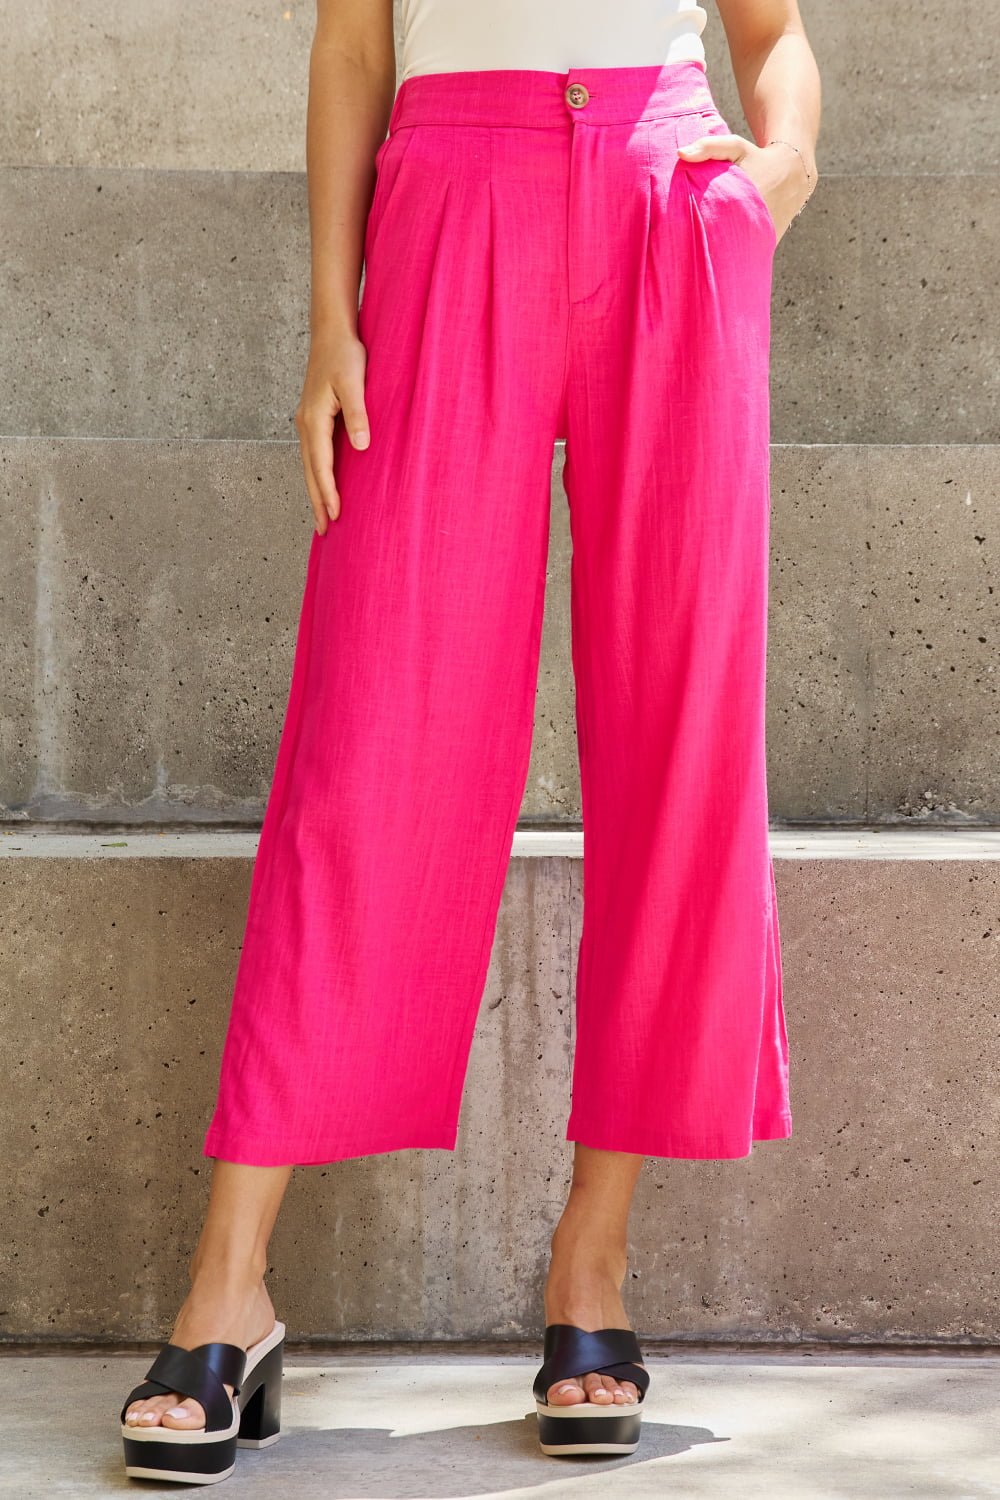 In The Mix Pleated Detail Linen Pants in Hot Pink